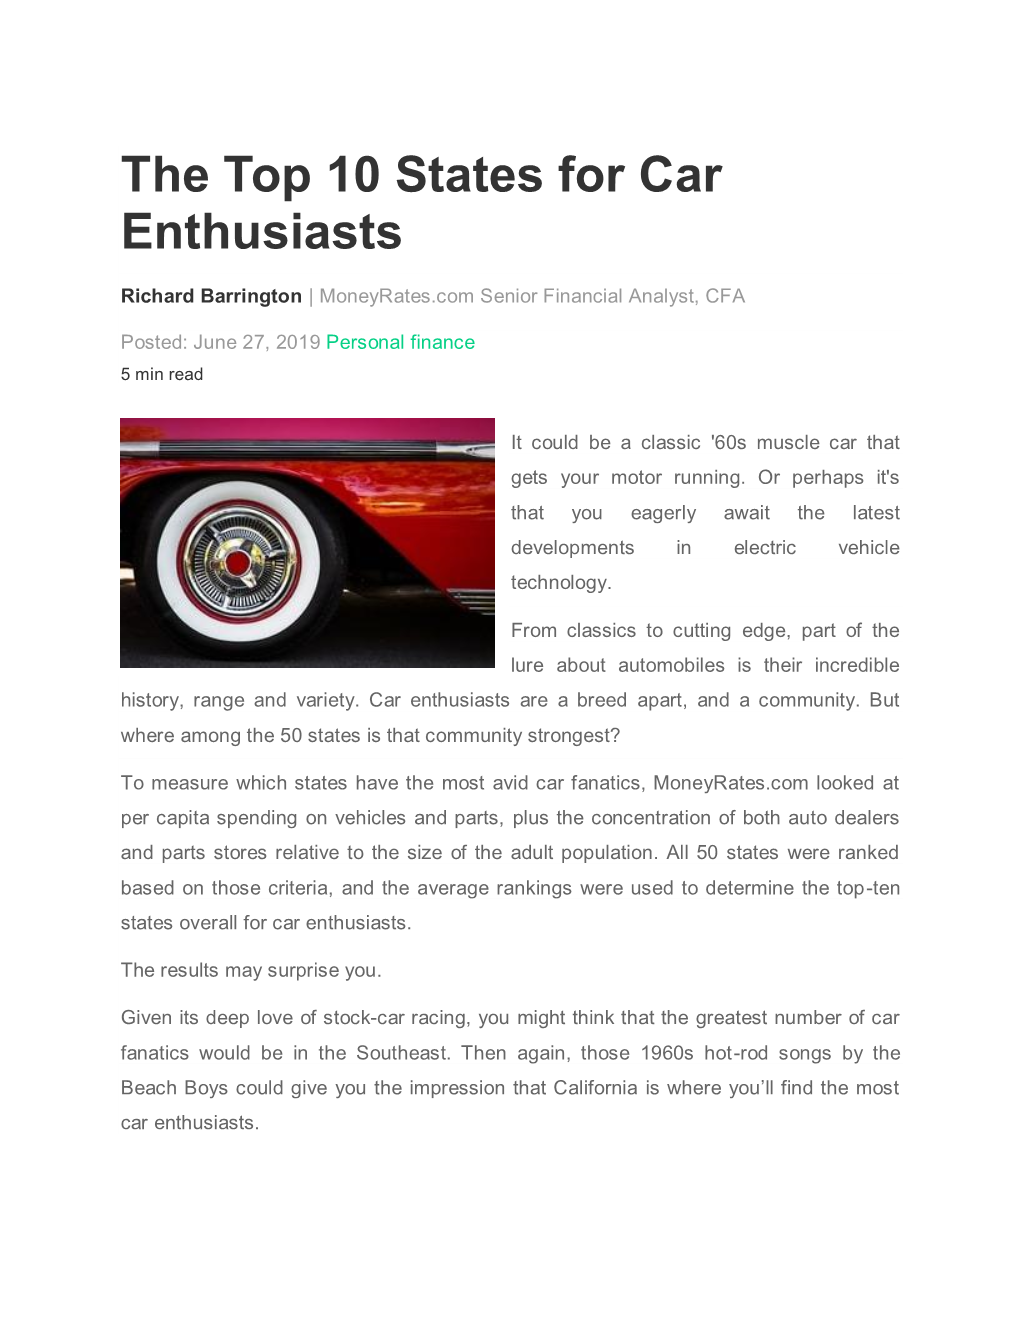 The Top 10 States for Car Enthusiasts